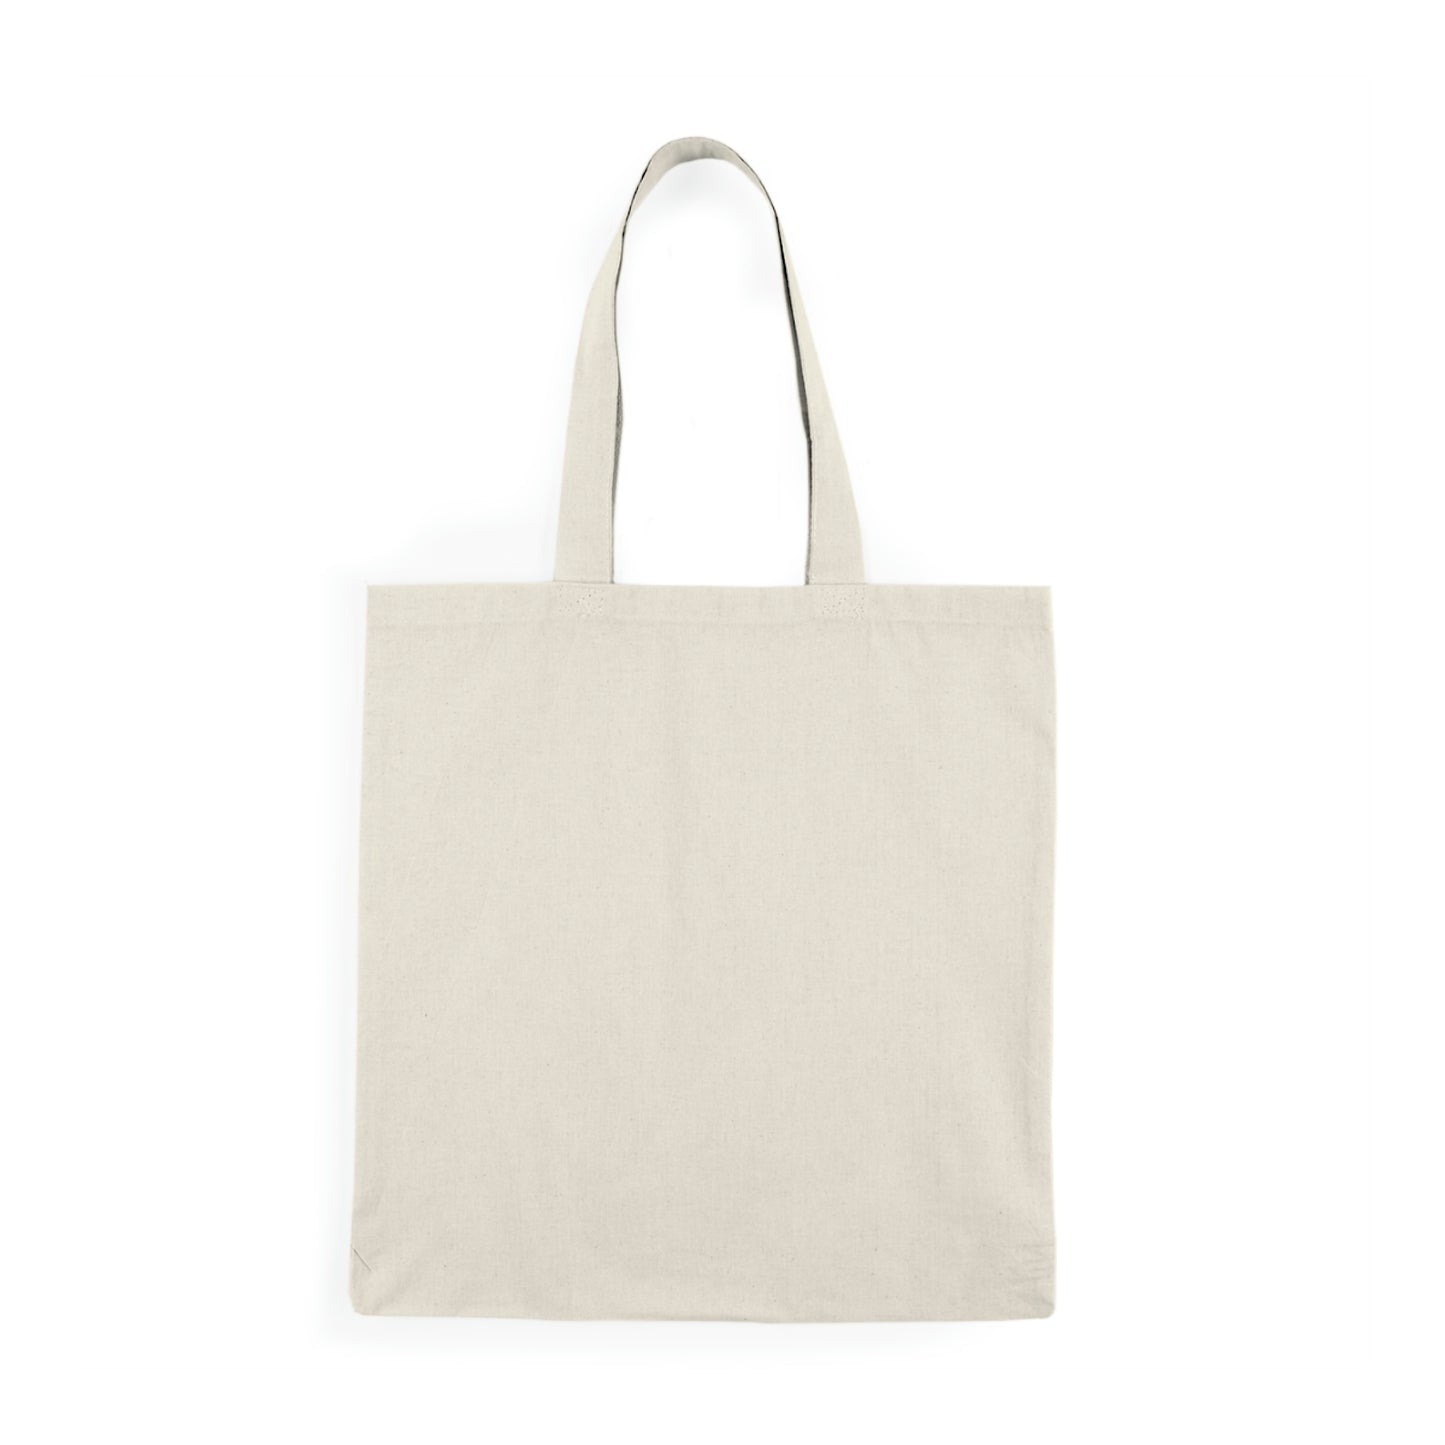 Calliope's Spell - Natural Tote Bag